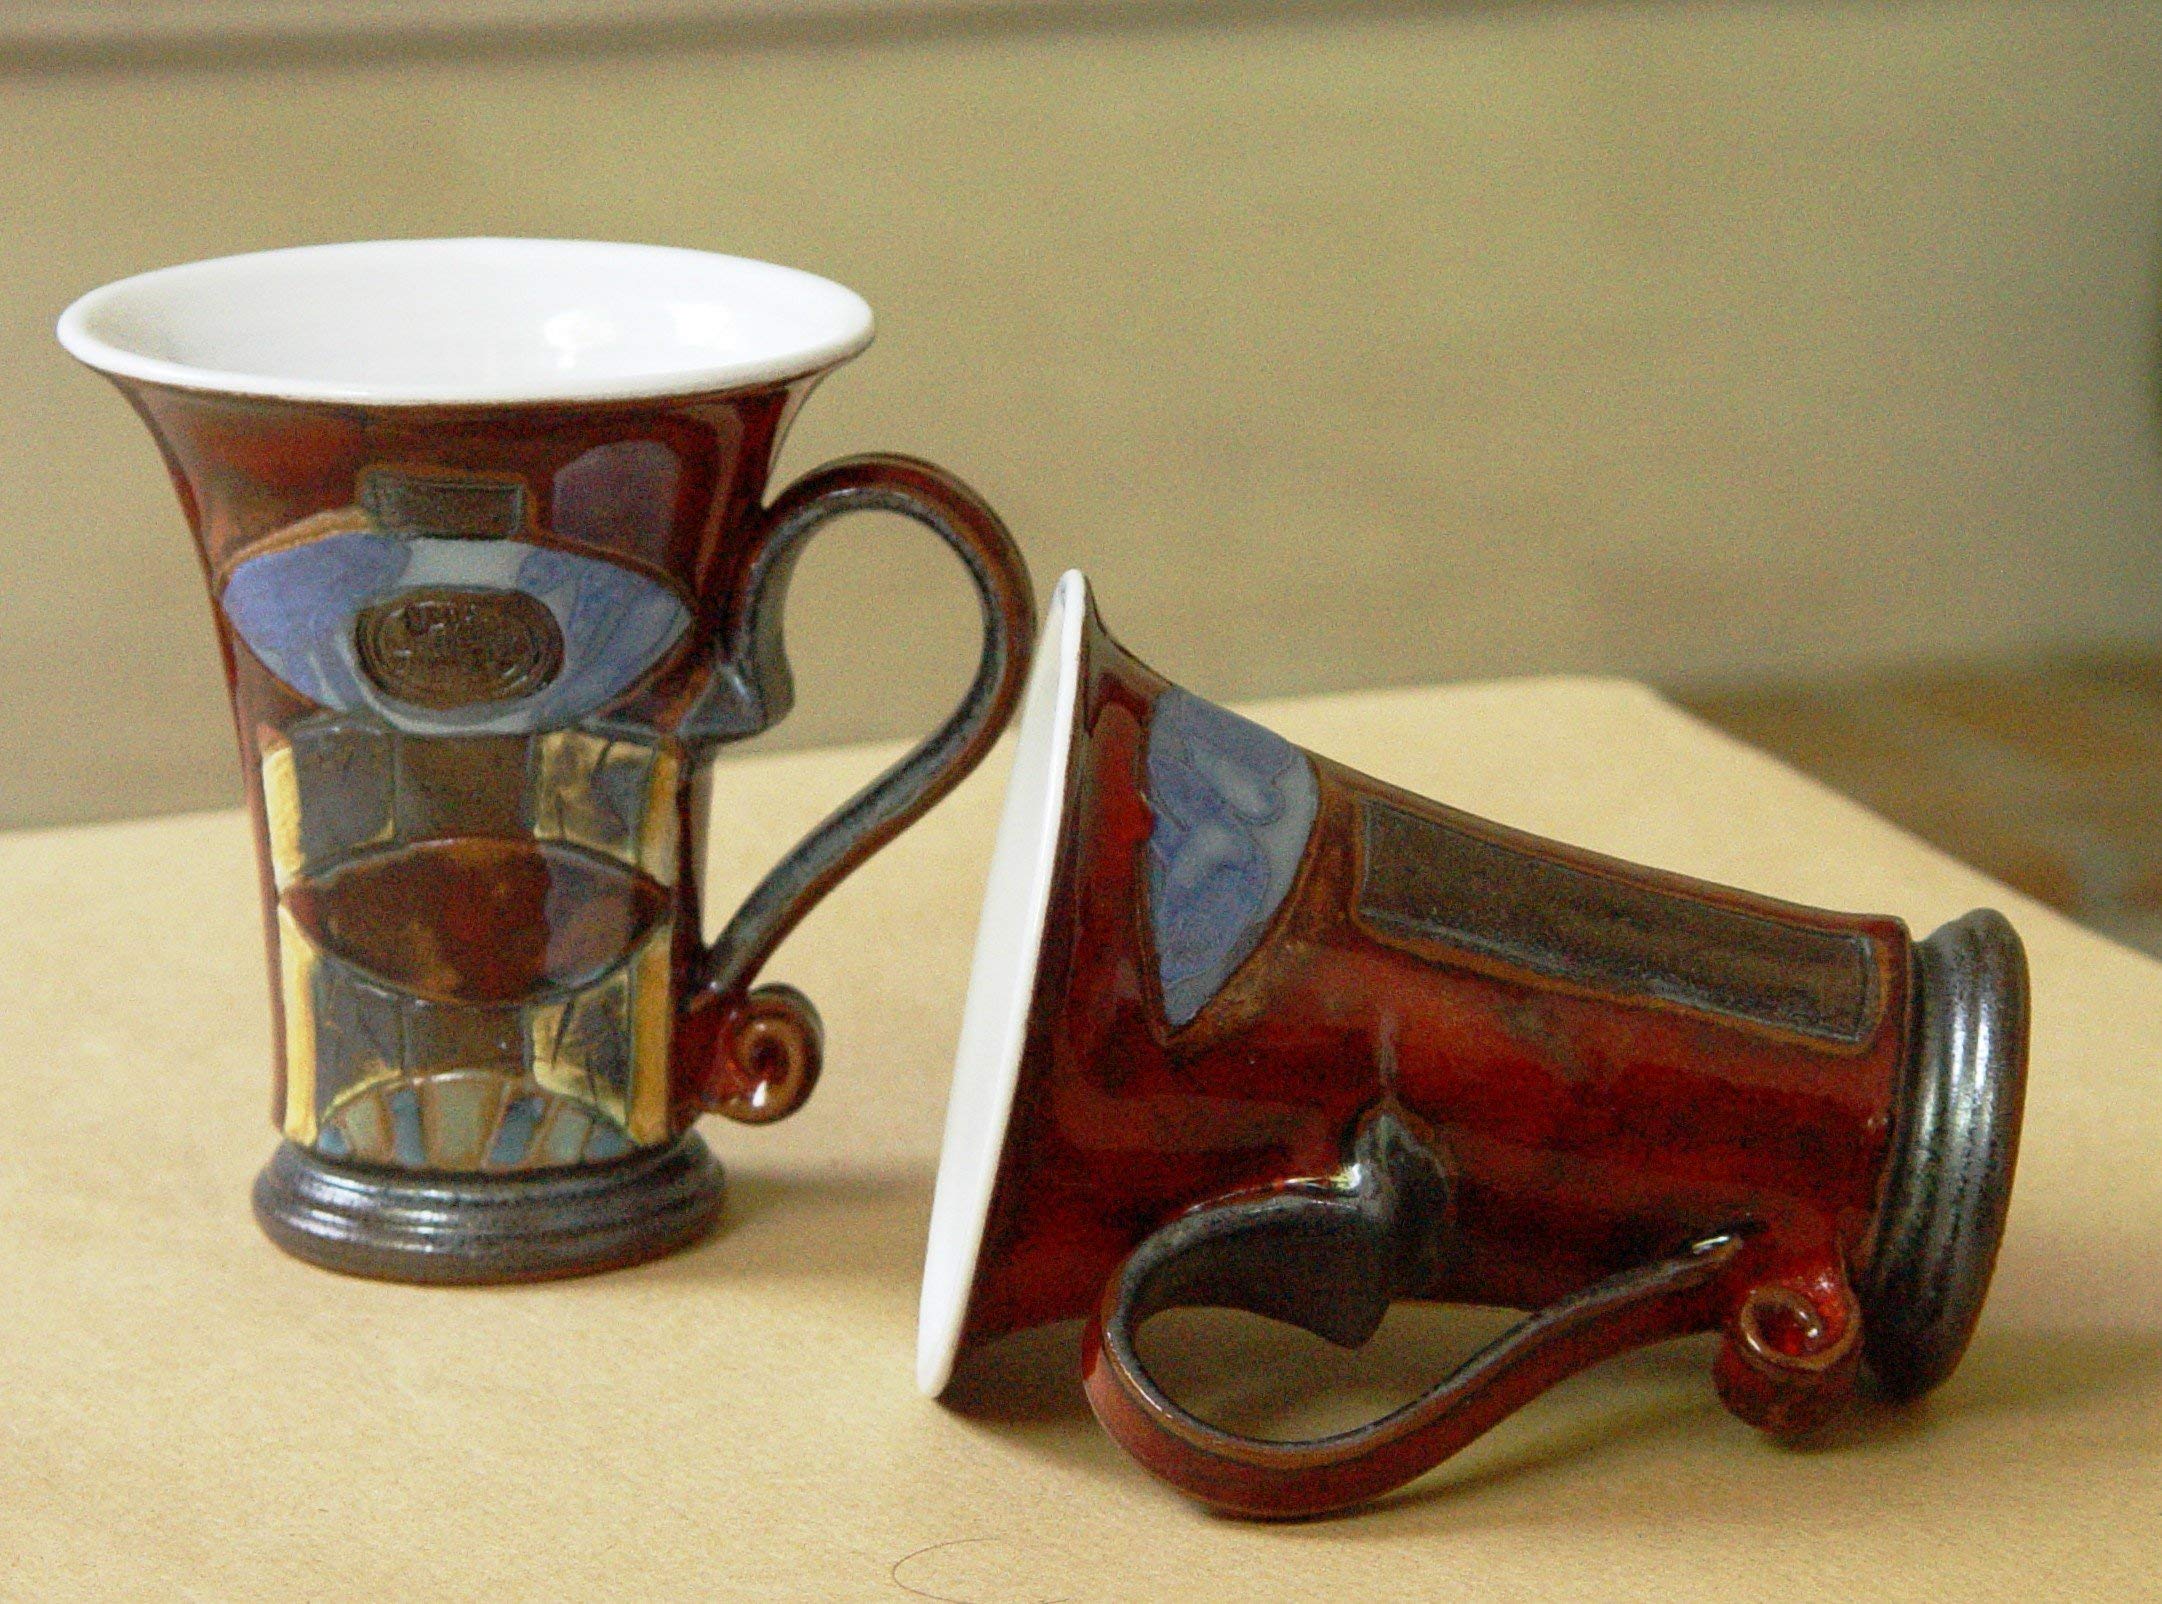 Pottery Set of Two Mugs, Wheel Thrown Red Ceramic Mugs with Unique Hand Painted Decoration